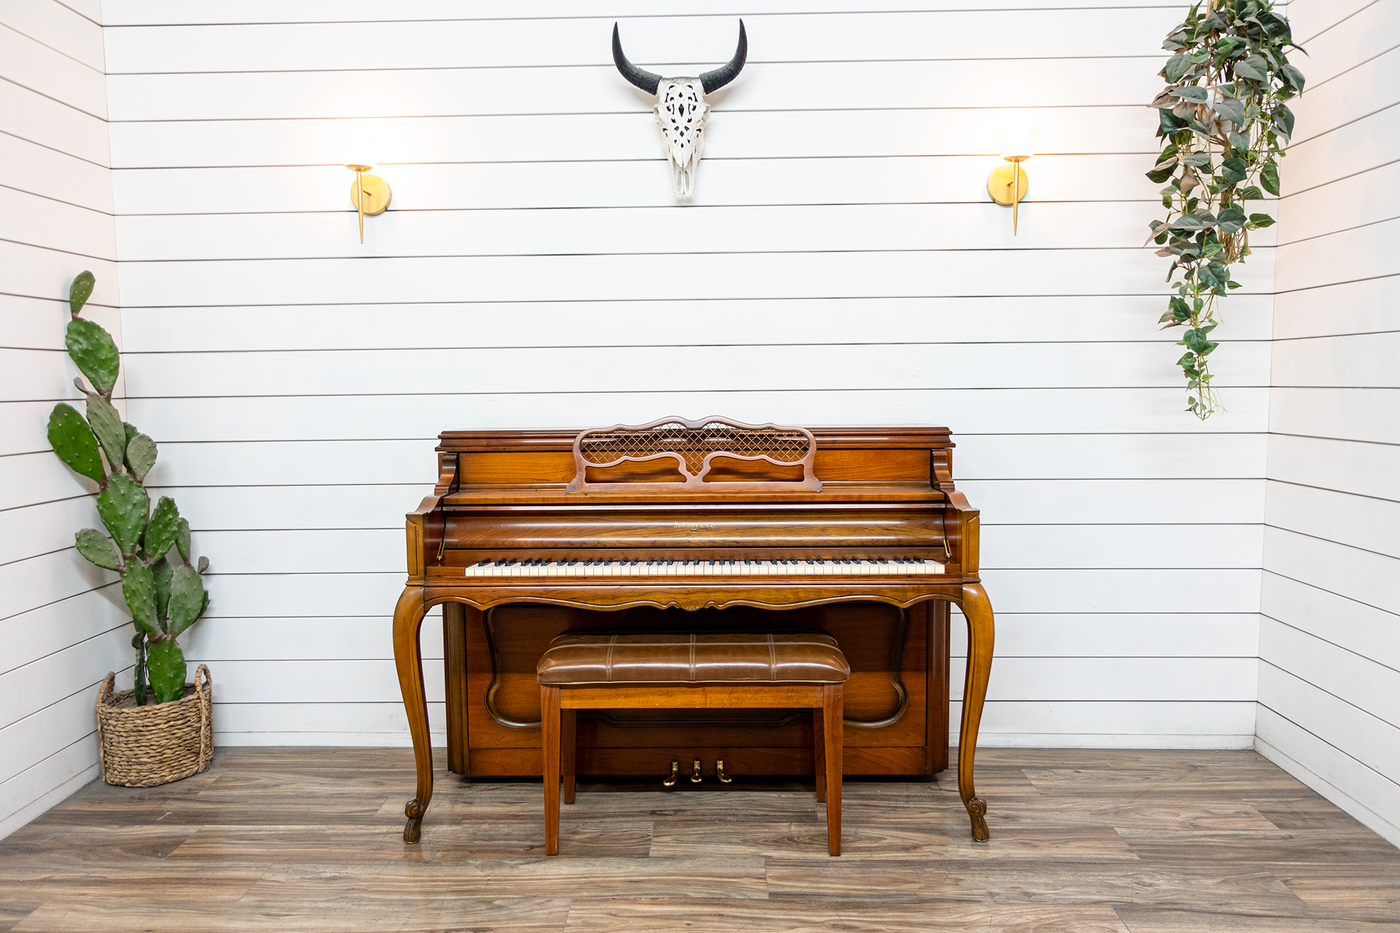 Somer & Co #34 Upright Piano